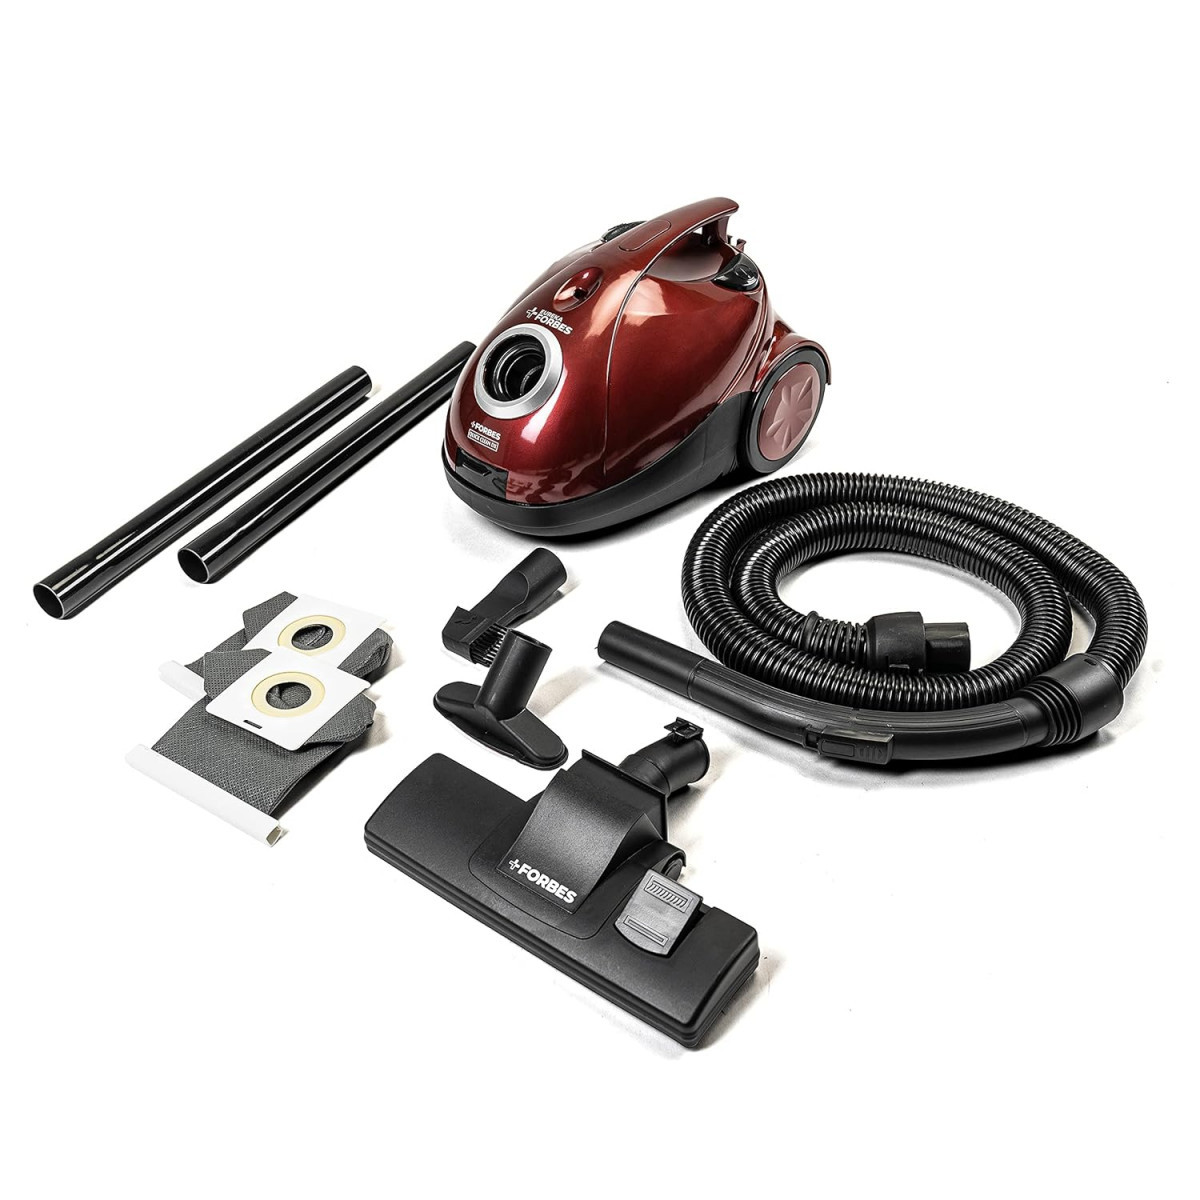 Eureka Forbes Quick Clean DX Vacuum Cleaner with 1200 Watts Powerful Suction Control 3 Free Reusable dust Bag worth Rs 500 comes with multiple accessories dust bag full indicator Red standerd